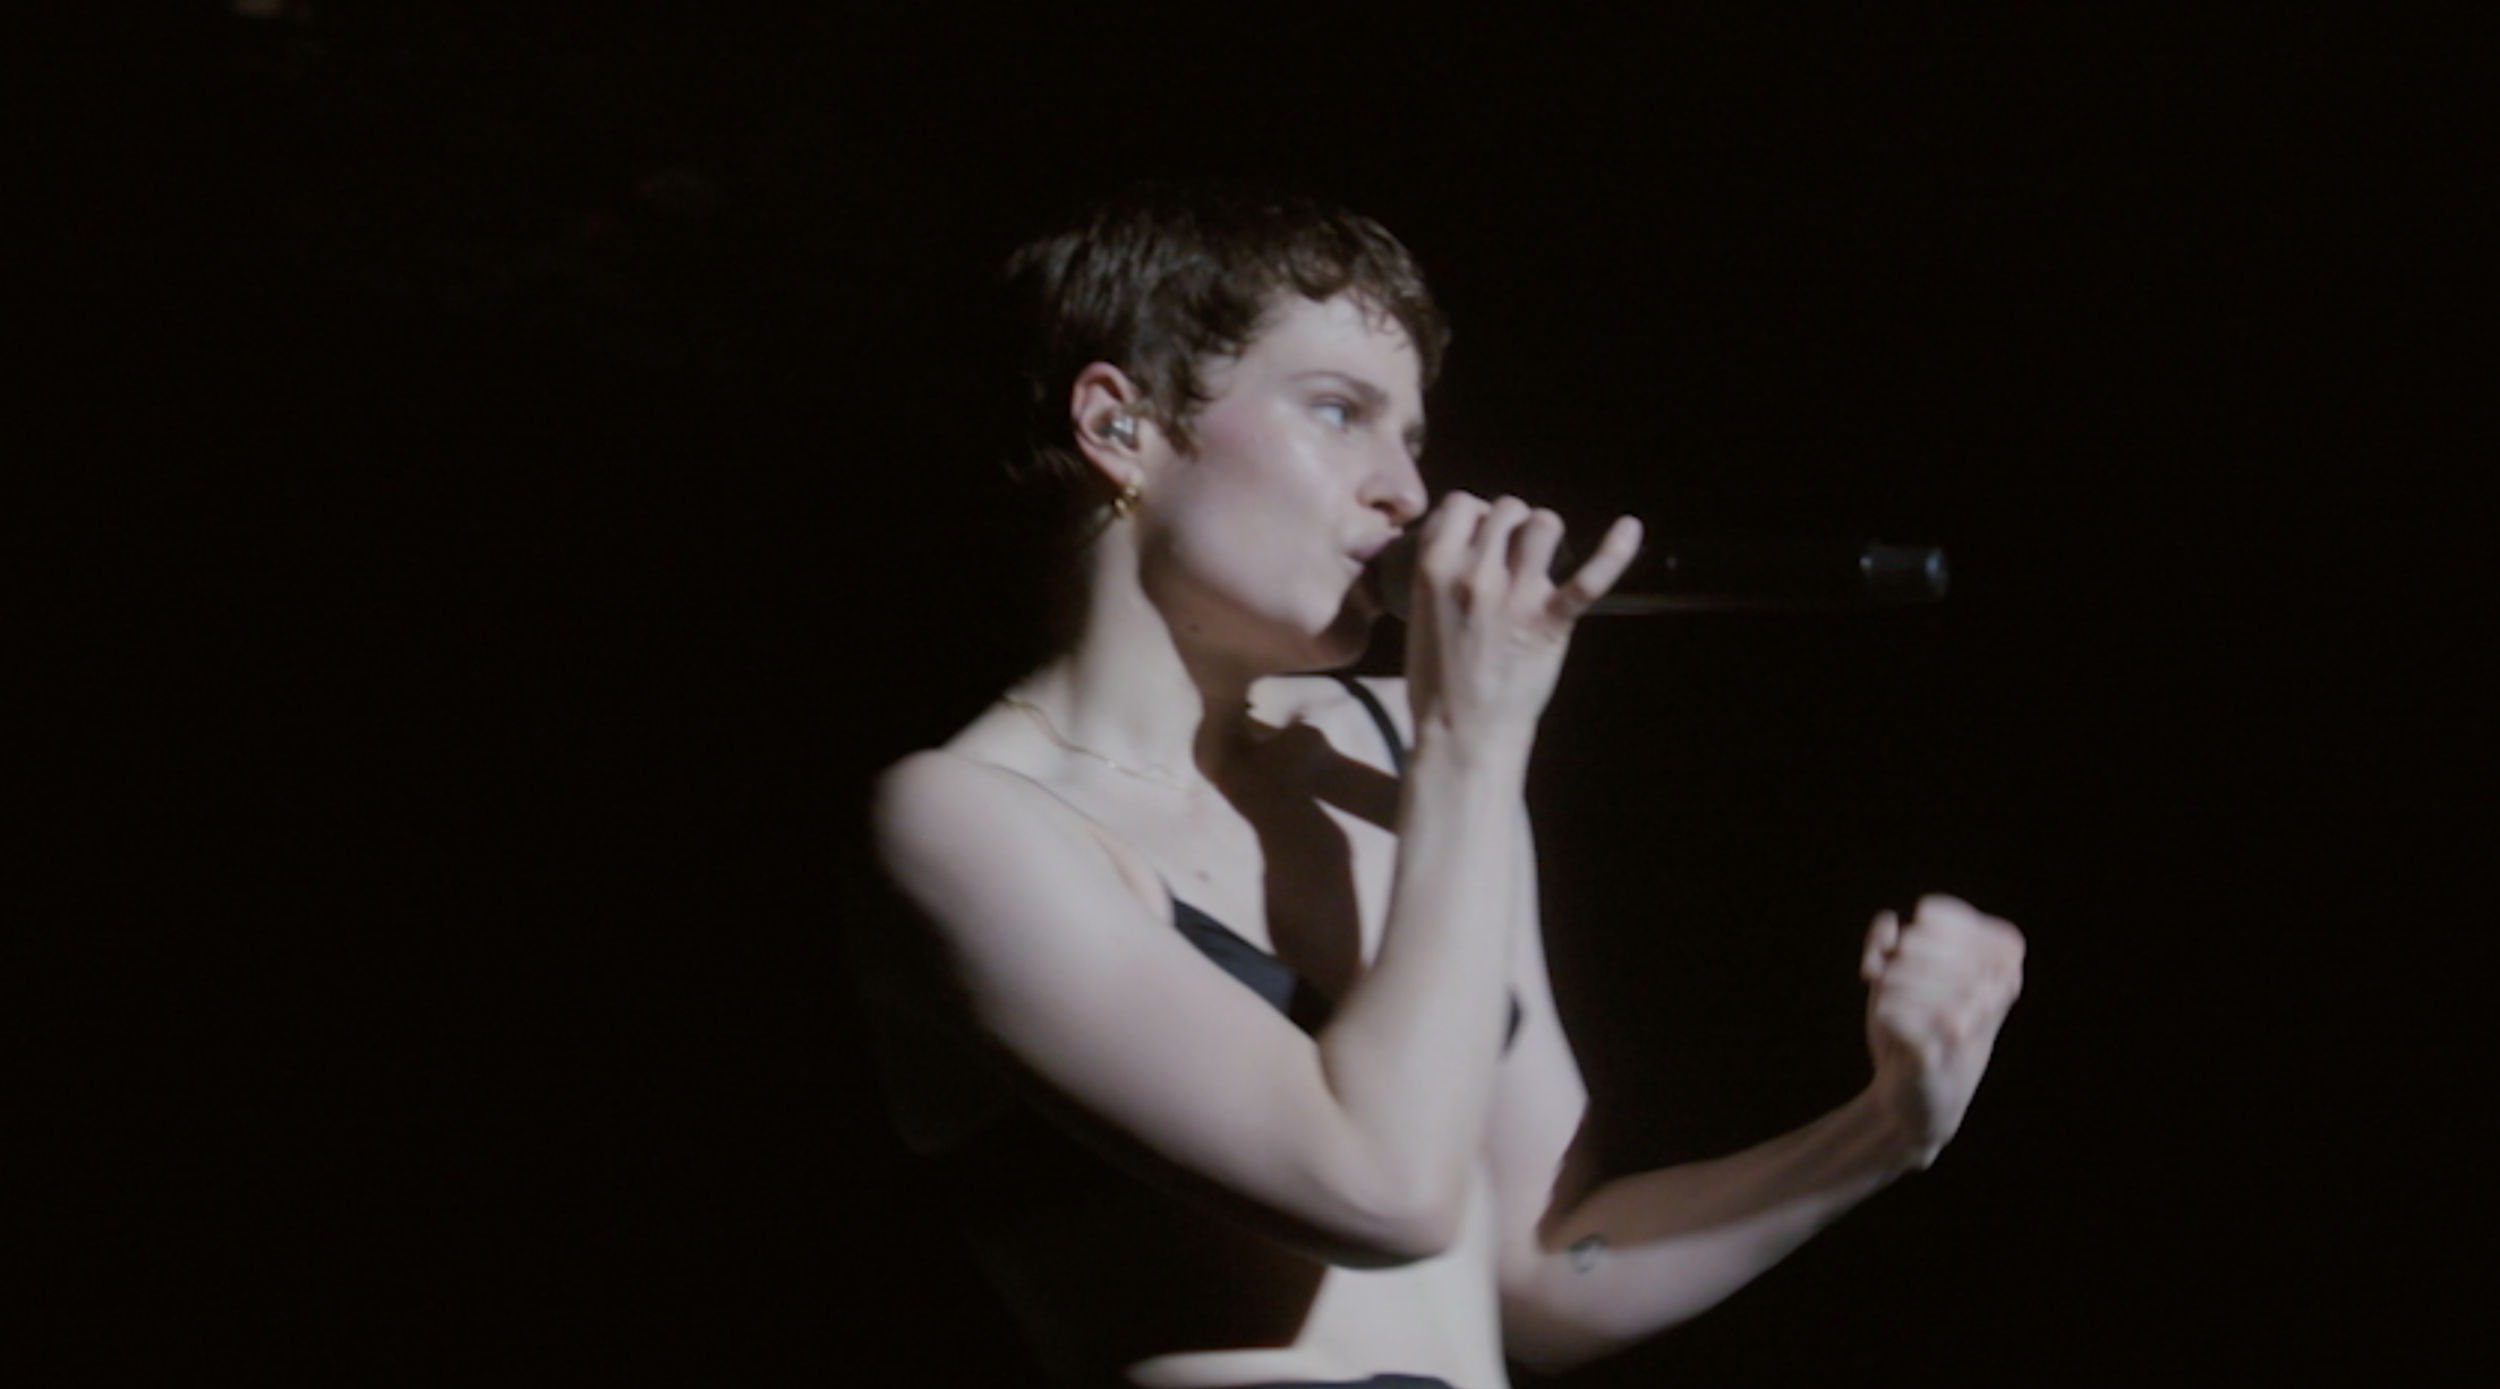 Photo Christine & the Queens